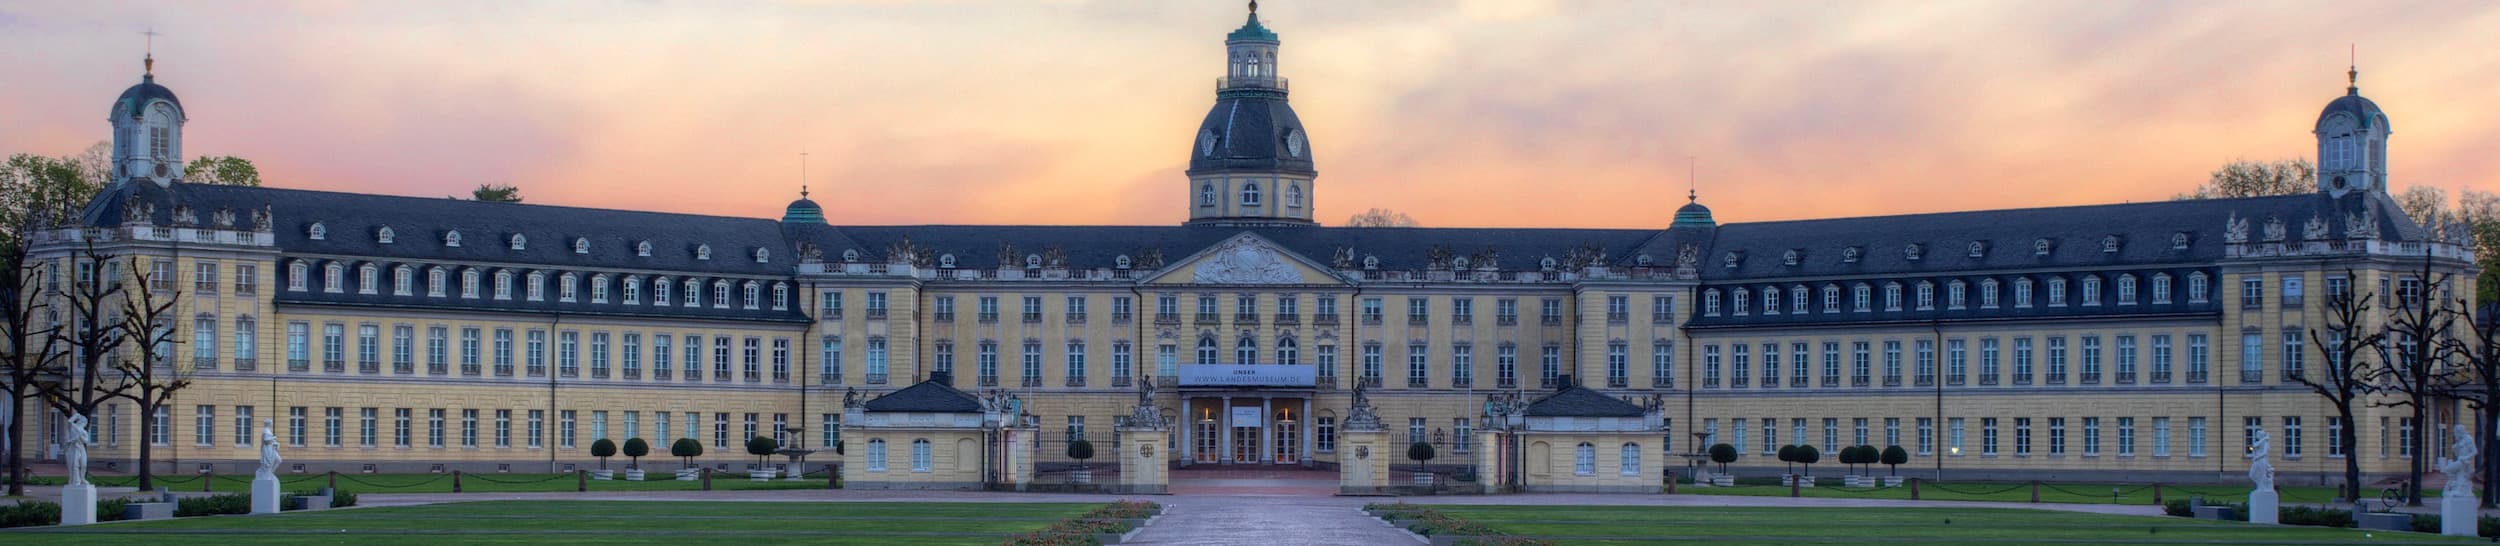 A picture of Karlsruhe by Christian Reimer